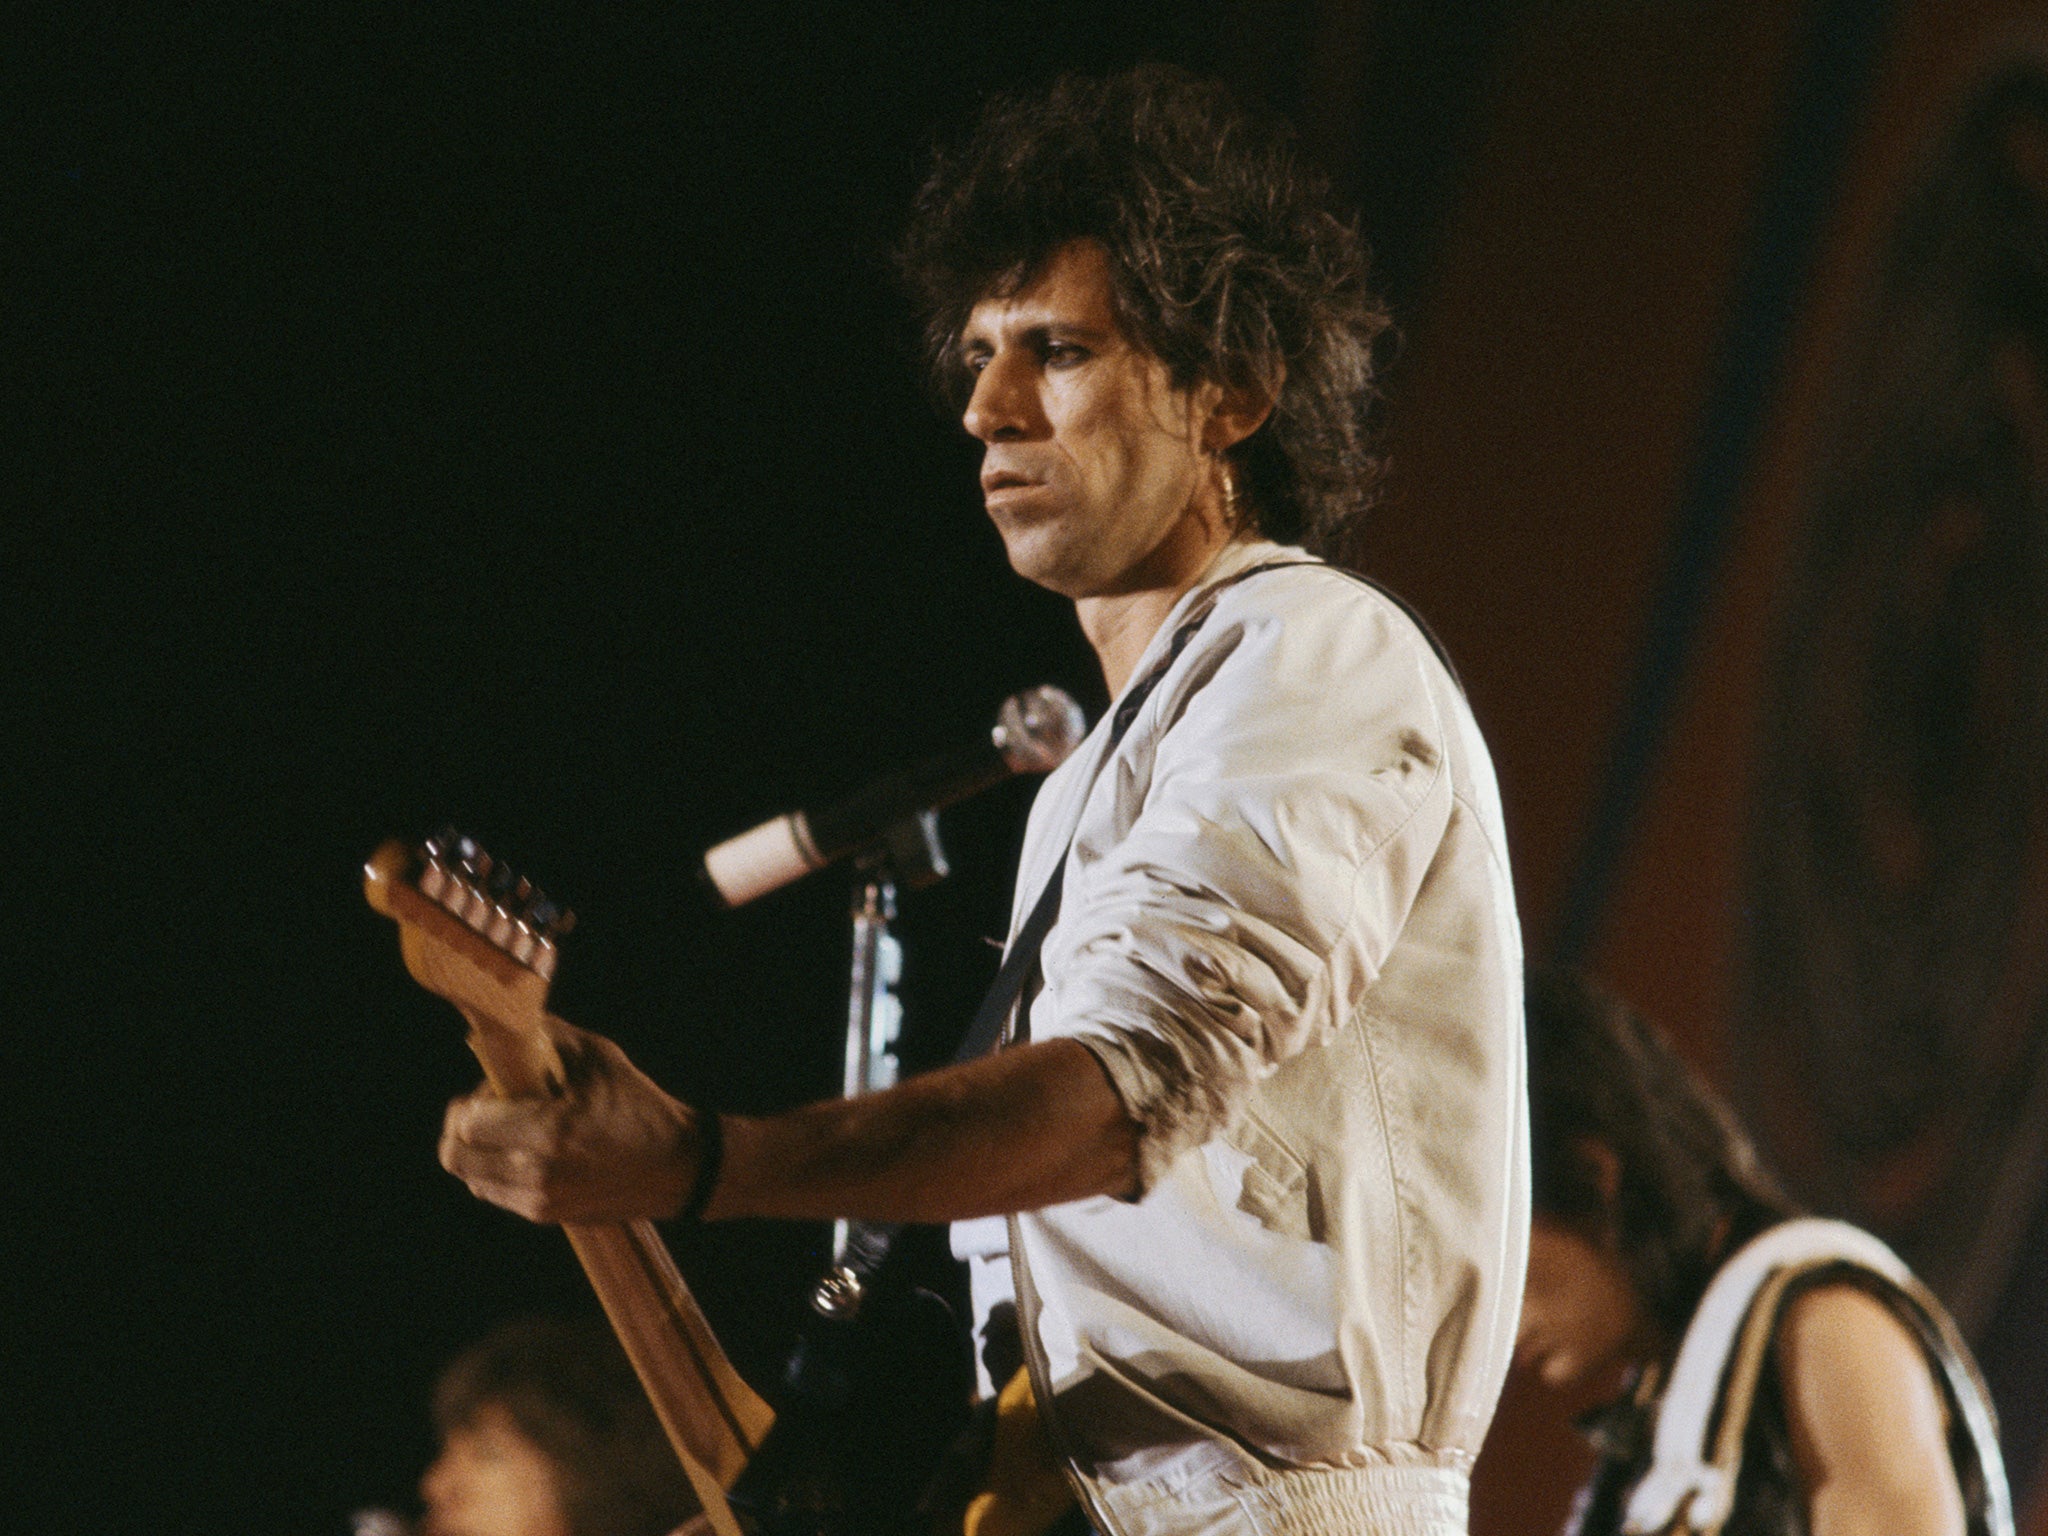 Keith Richards wrote "(I Can't Get No) Satisfaction" using the the Fuzz-Tone